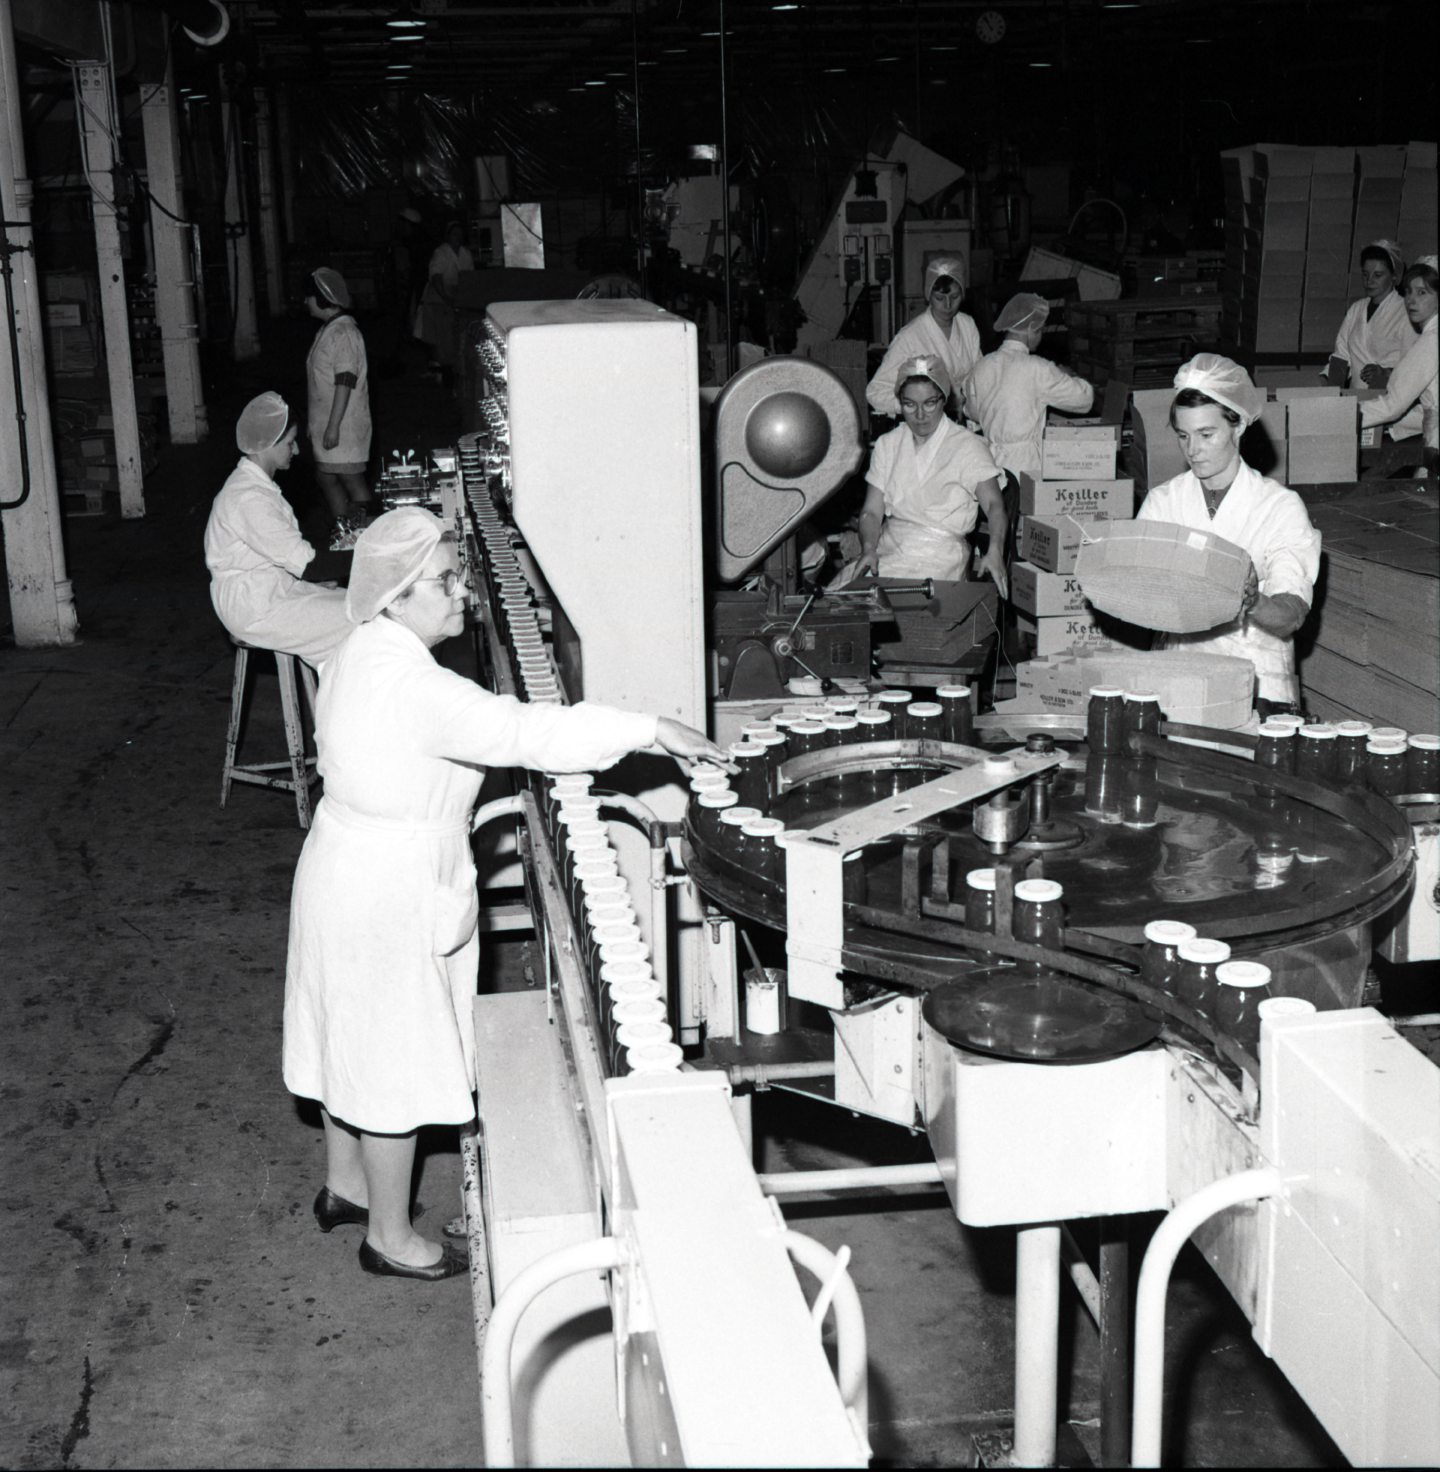 Marmalade being made at the Keiller's factory in 1965. Image: DC Thomson.